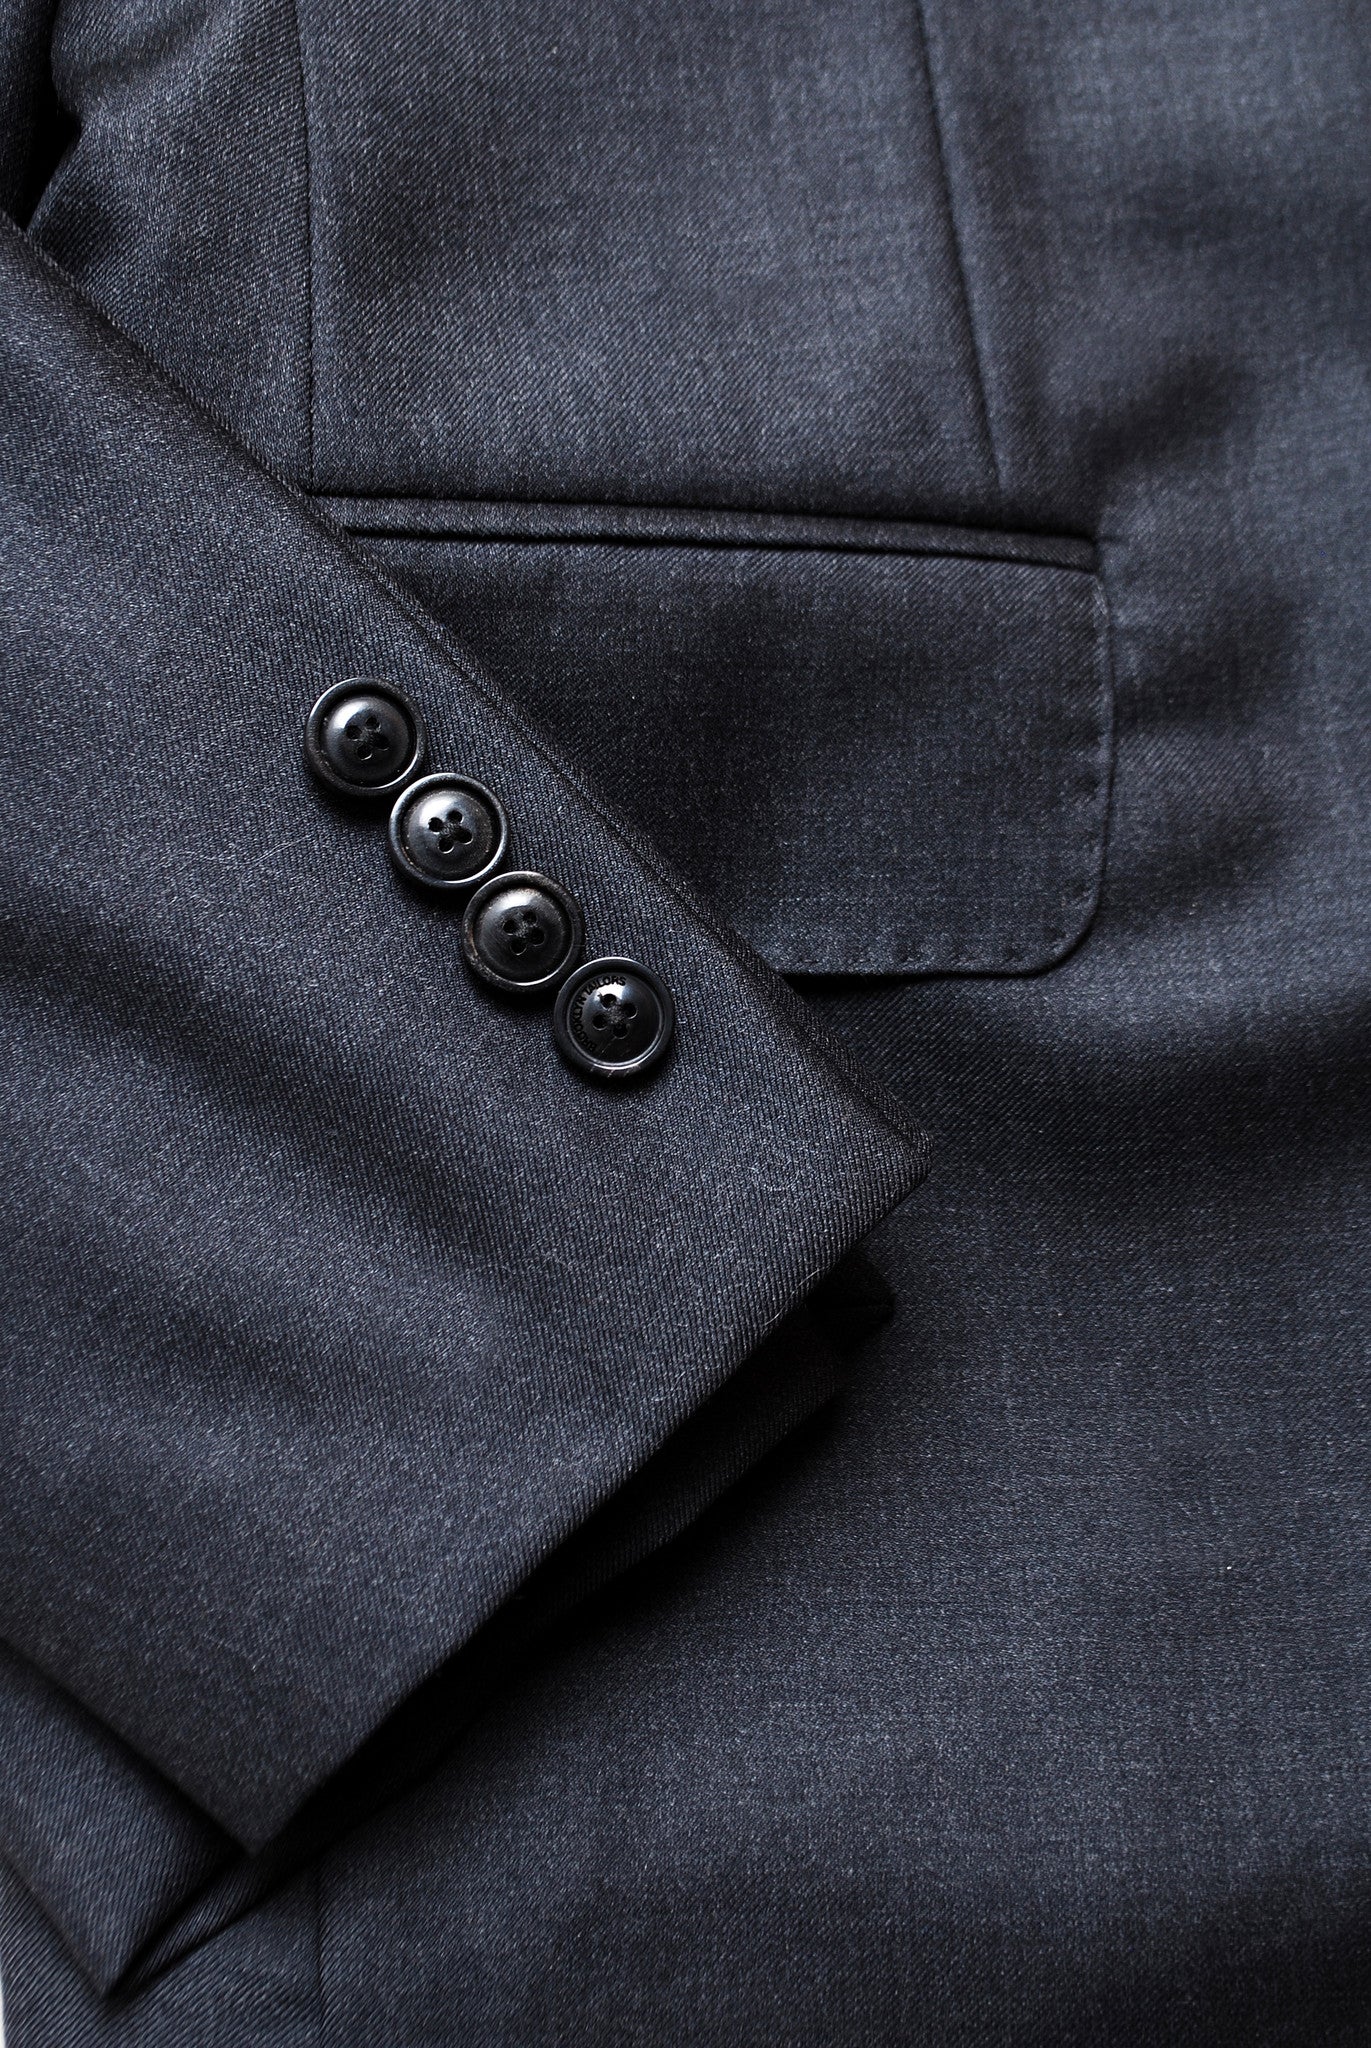 FINAL SALE: 2020 Version BKT50 Tailored Jacket in Super 110s Twill - Charcoal